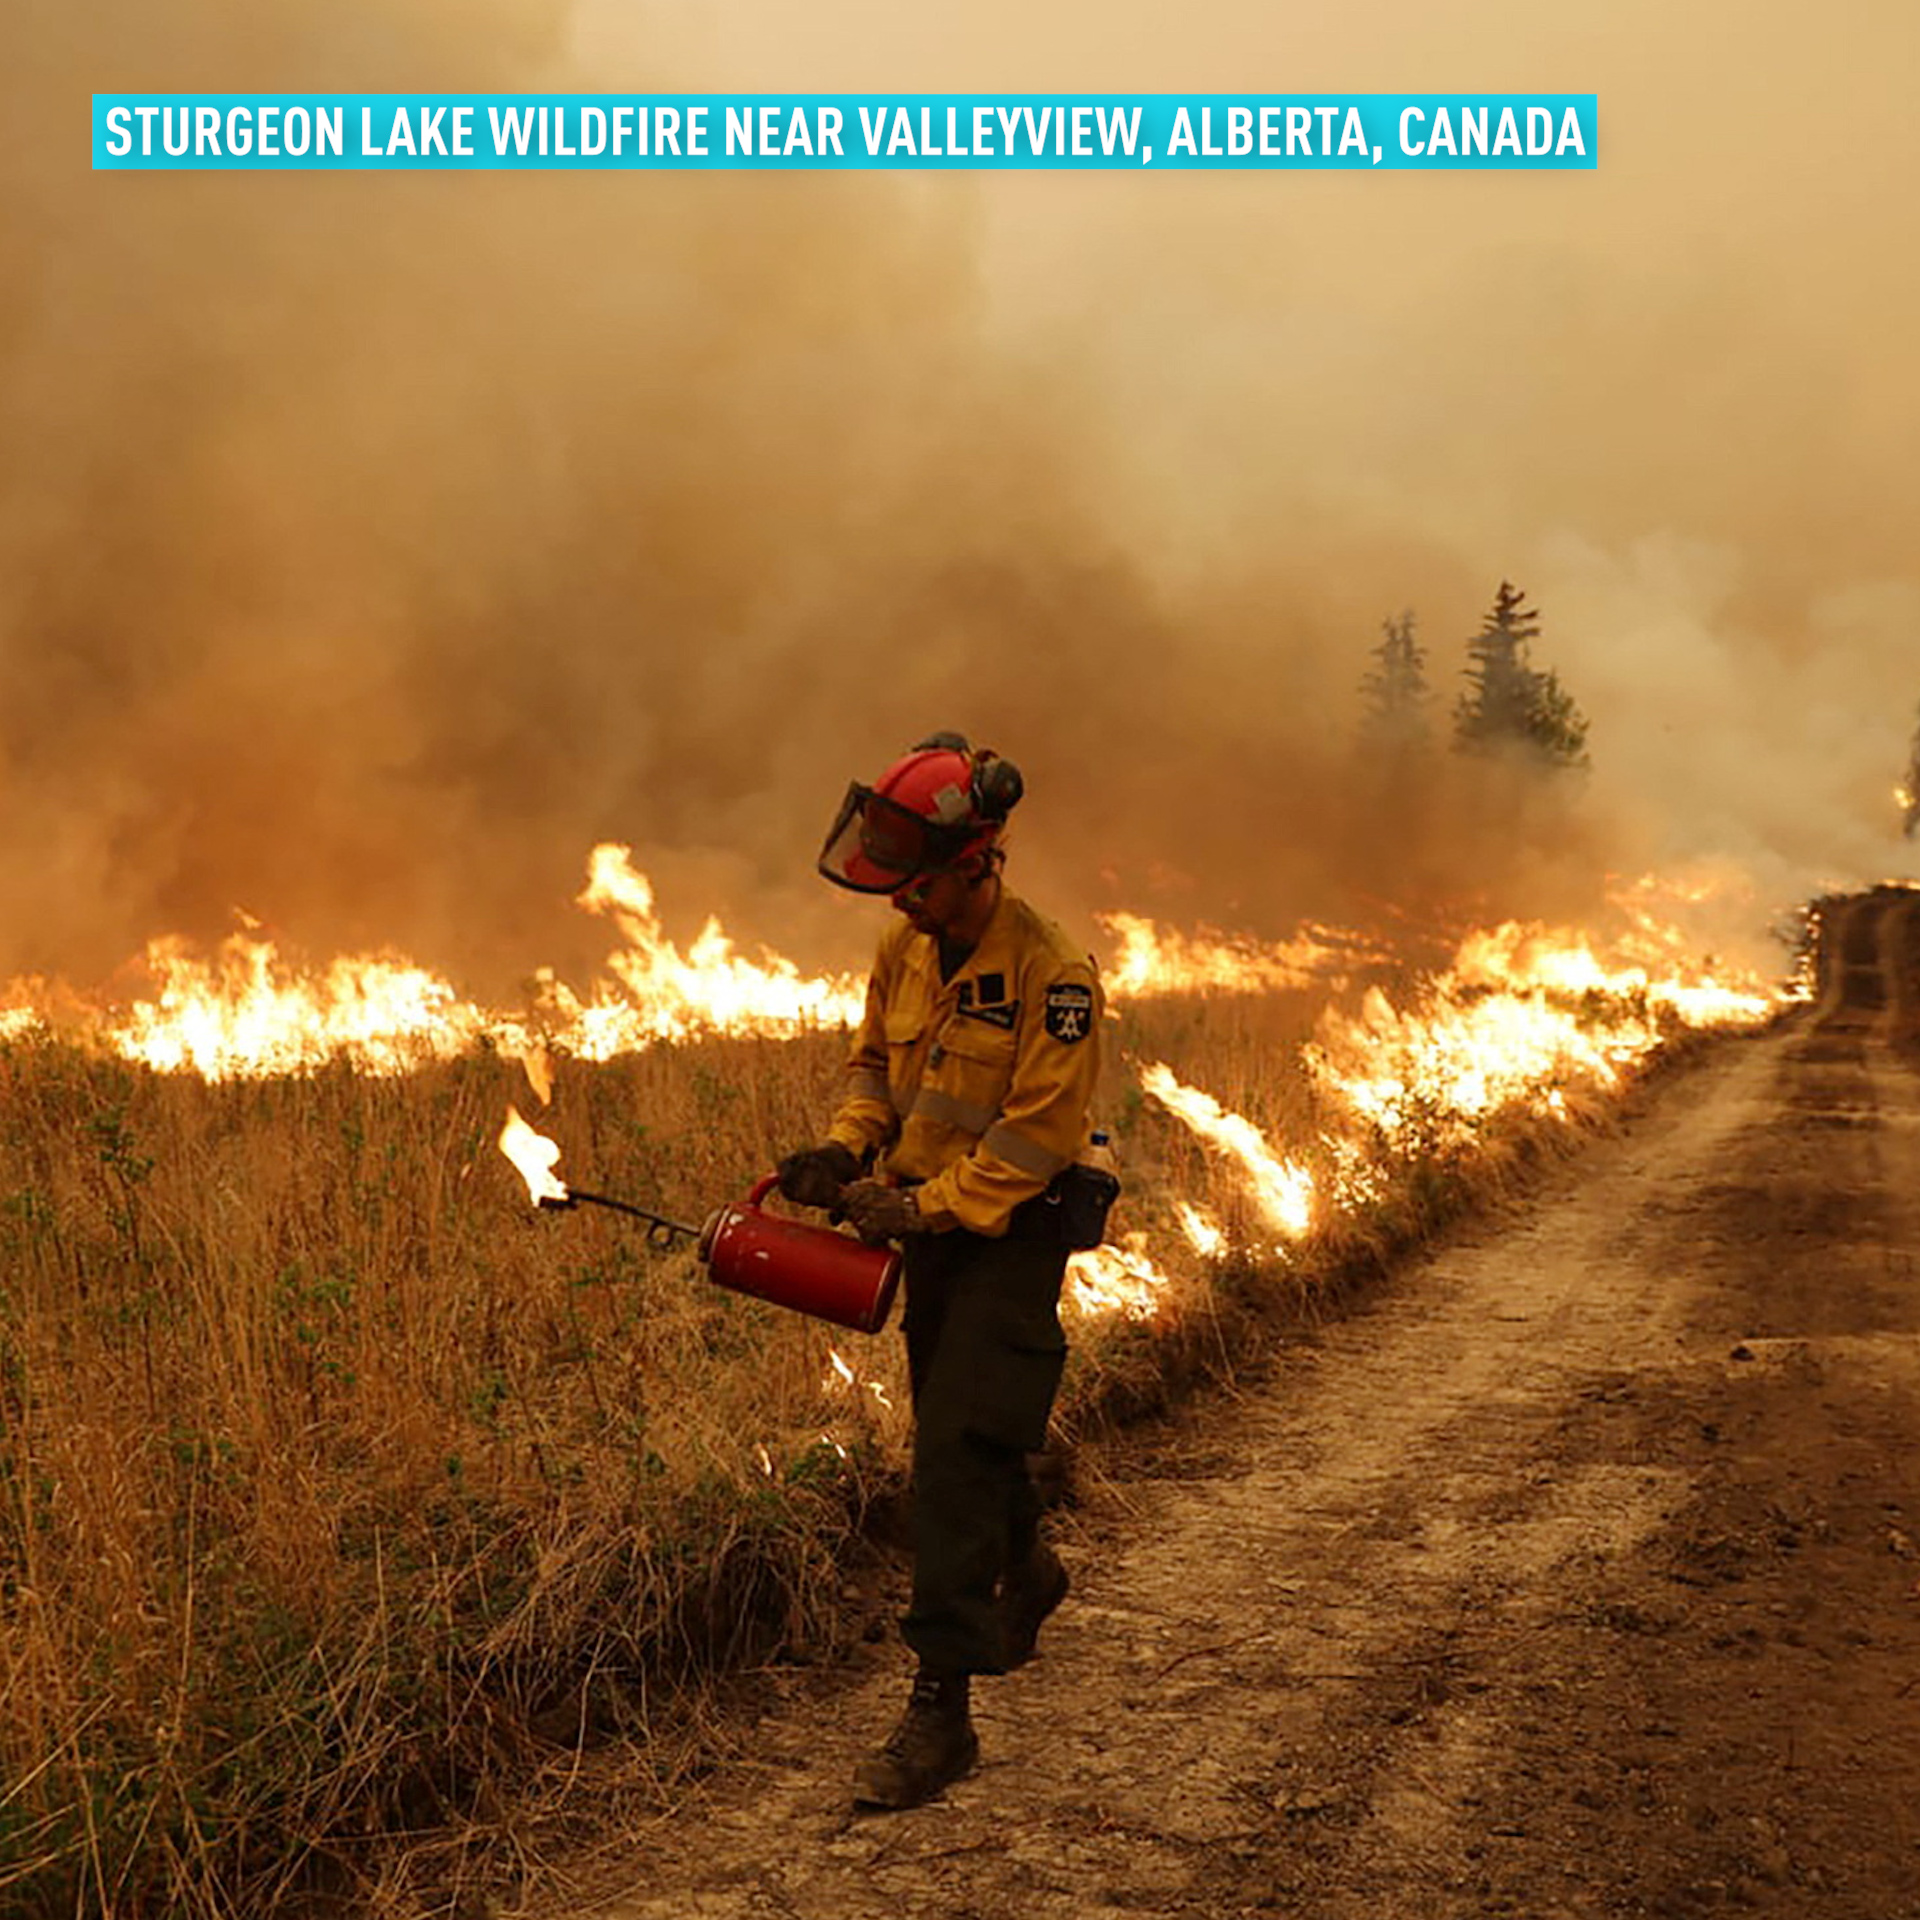 Canada hit with over 90 wildfires